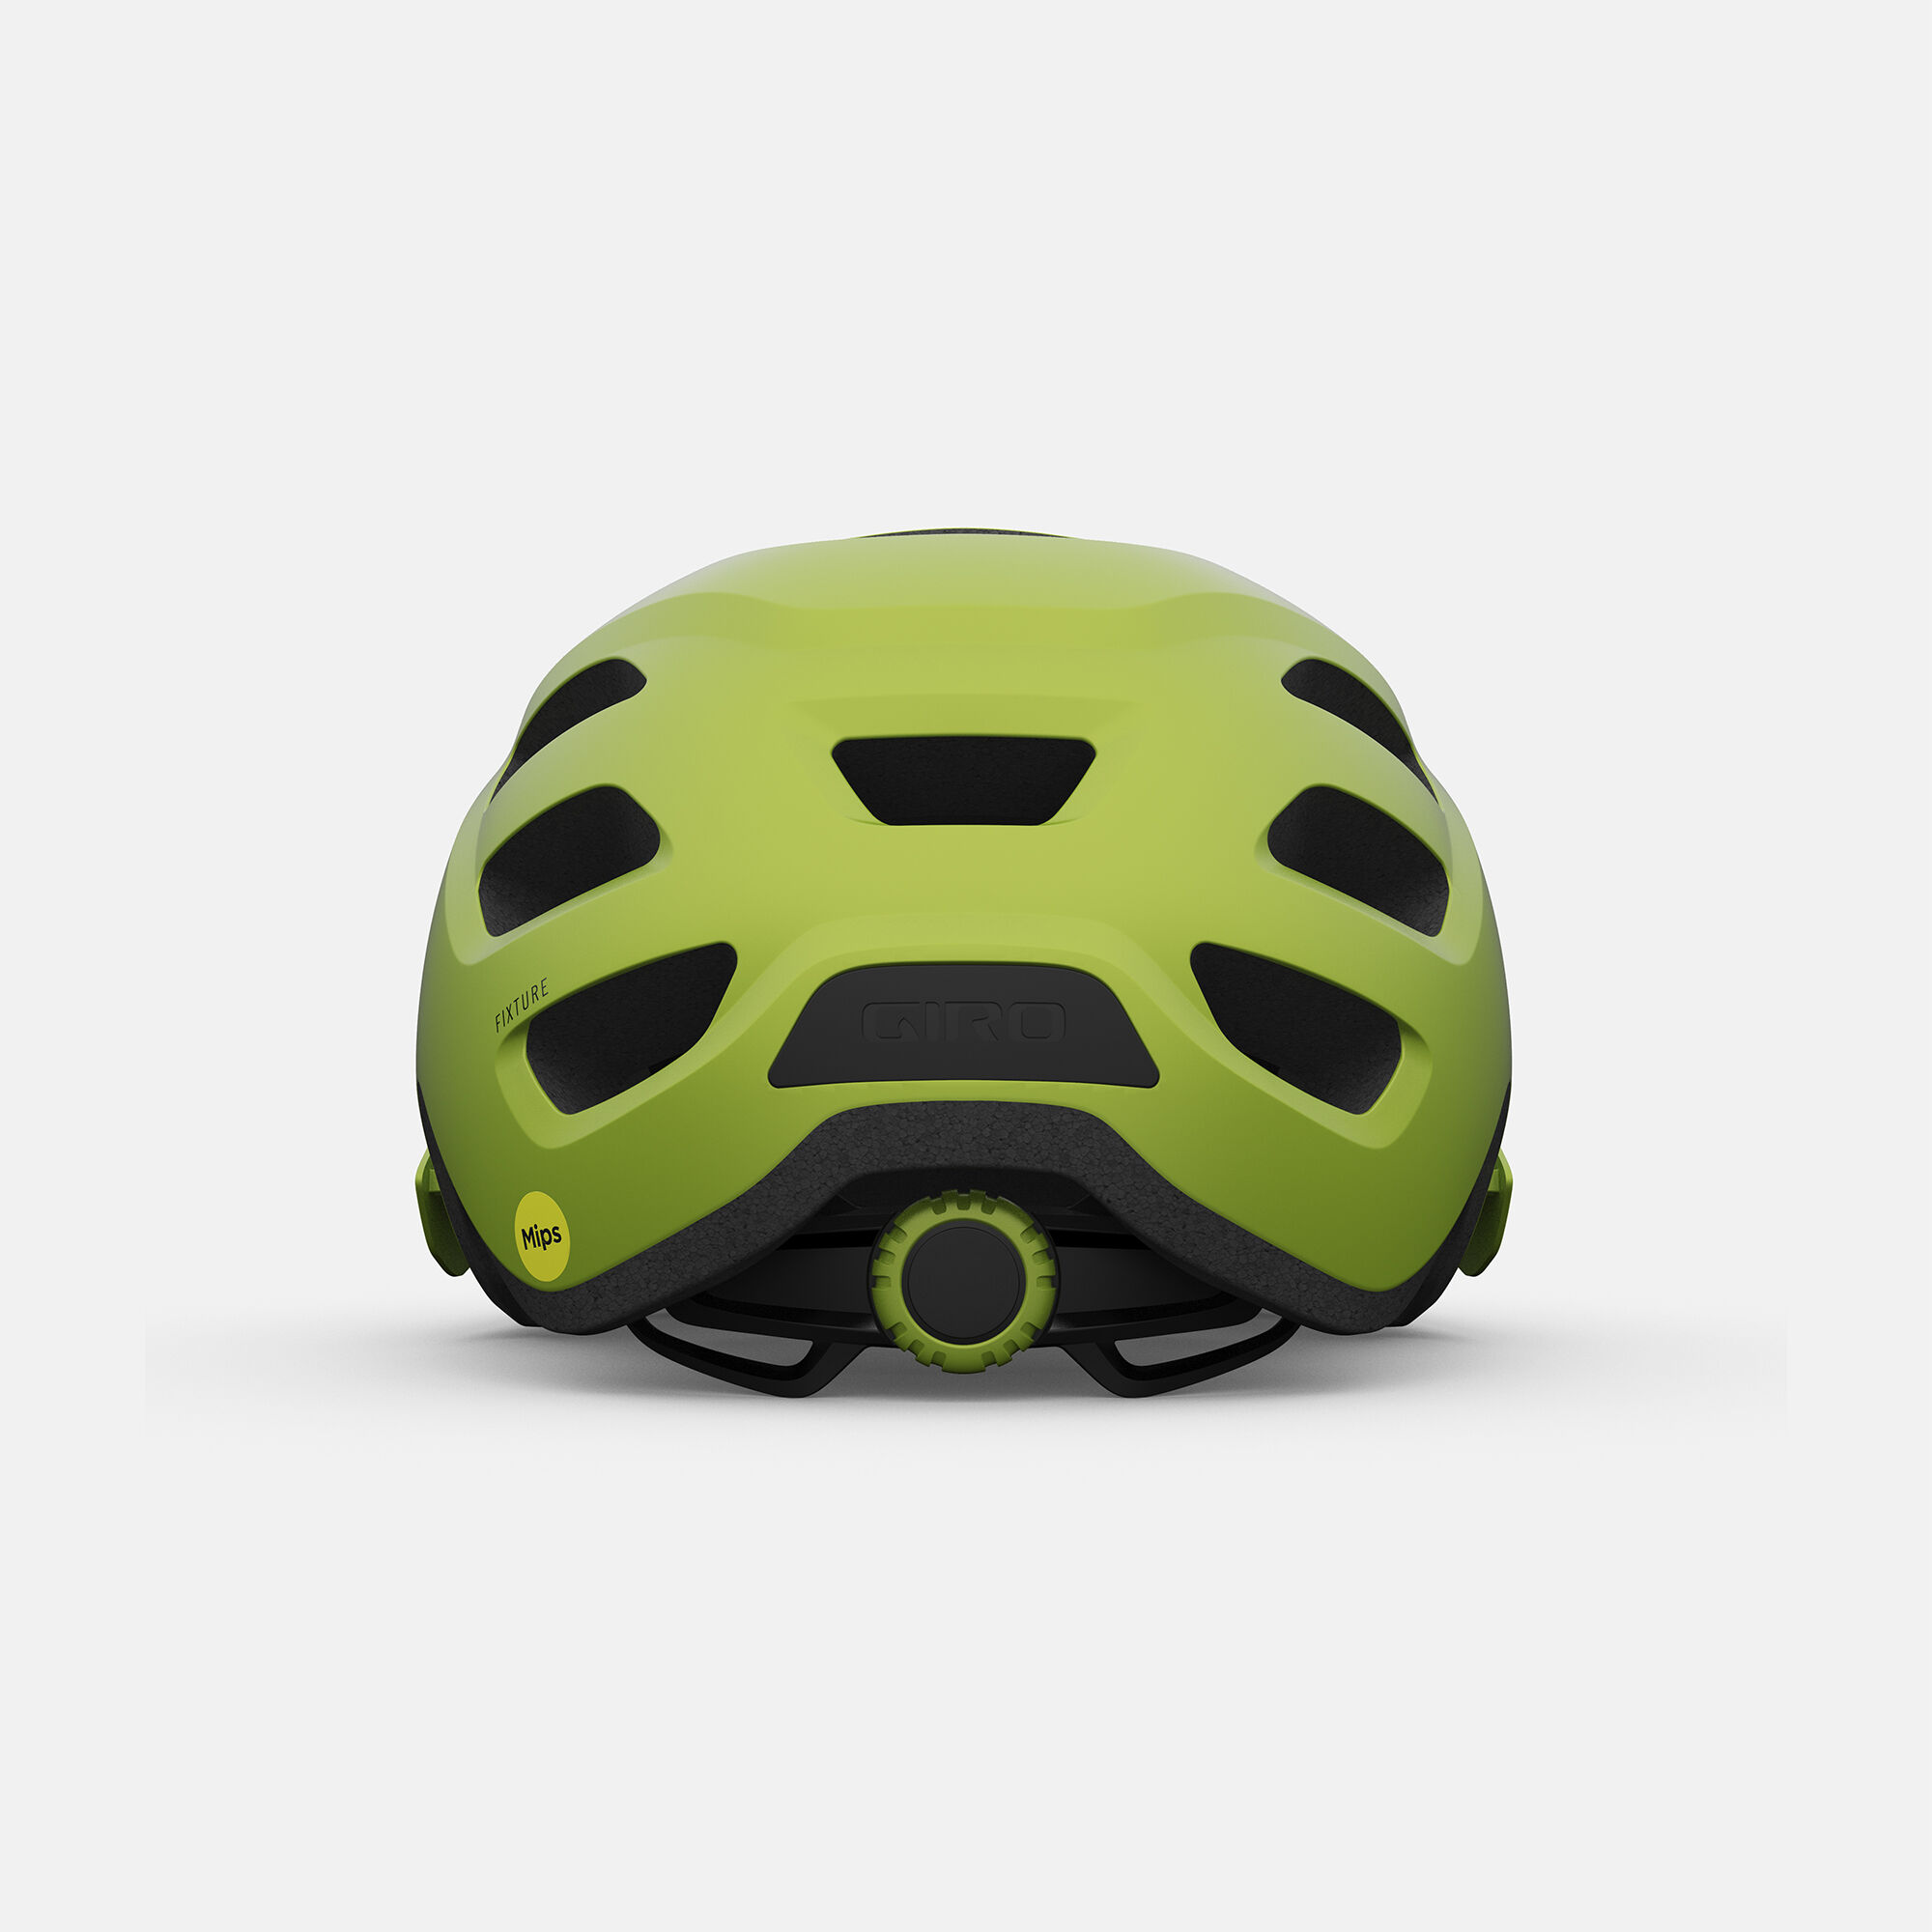 Details about   Giro Adult Fixture MIPS Bike Helmet Free Shipping New 